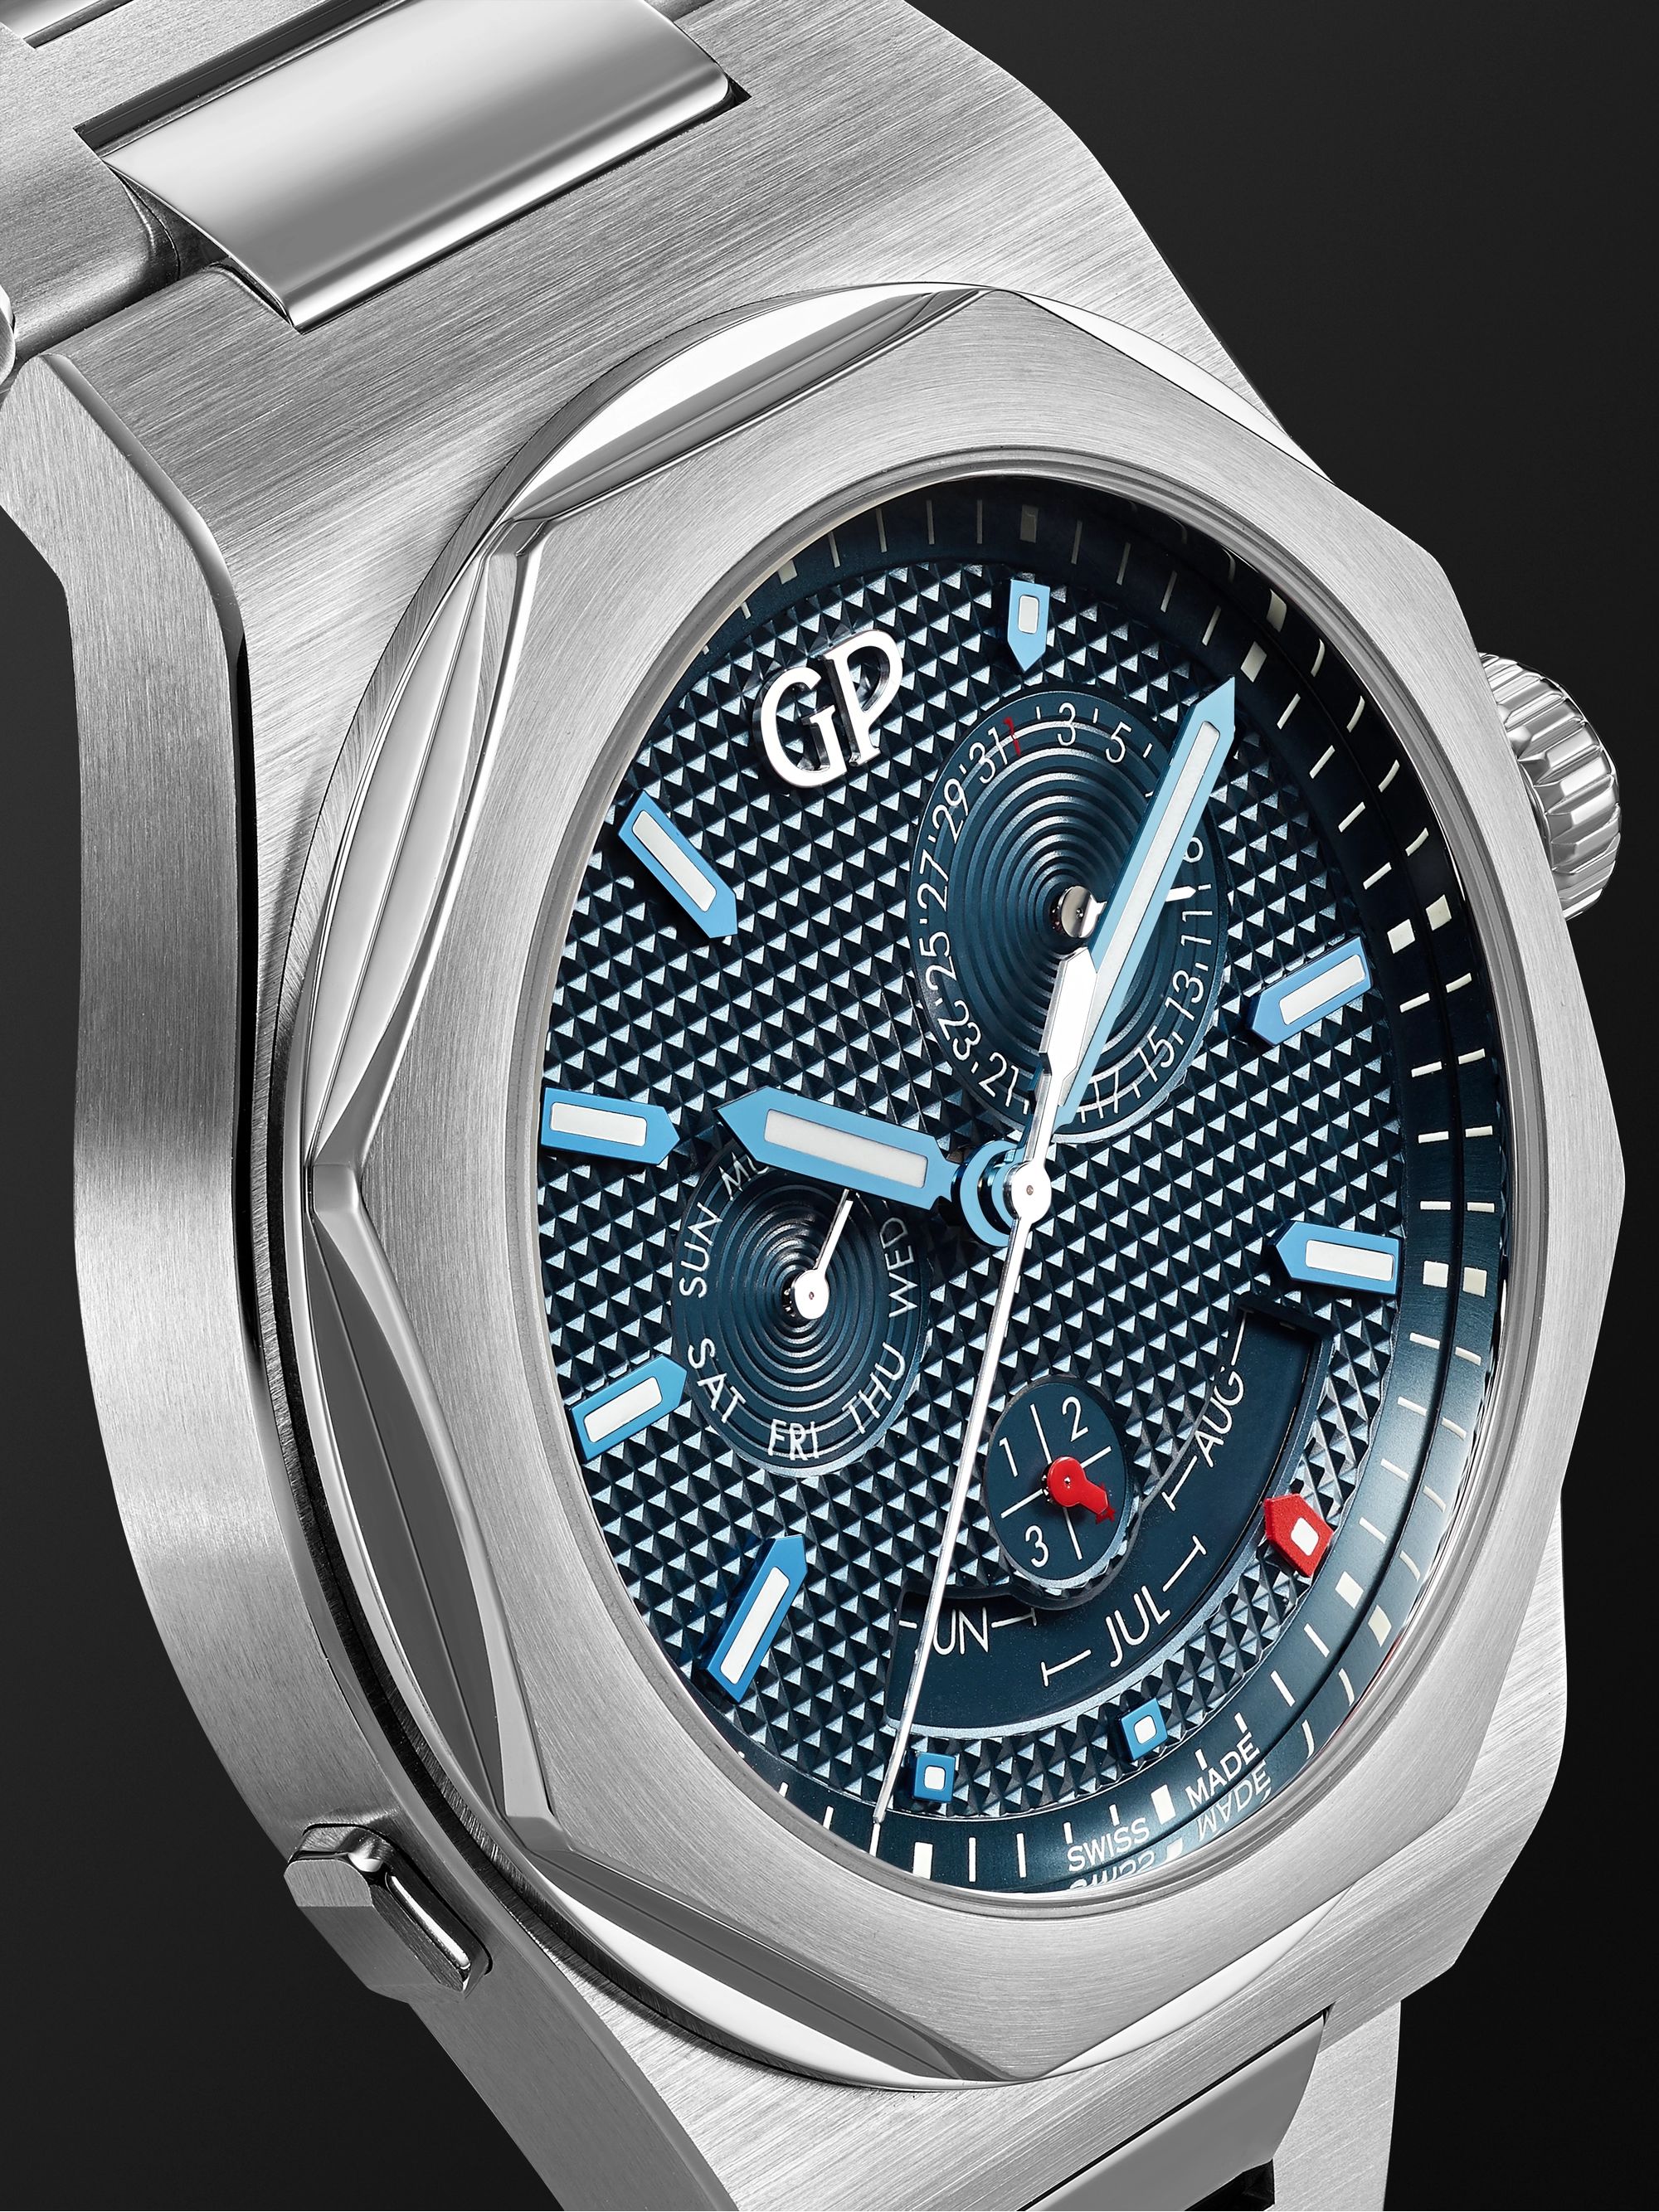 GIRARD-PERREGAUX Laureato Perpetual Calendar 42mm Automatic Stainless Steel Watch, Ref. No. 81035-11-431-11A